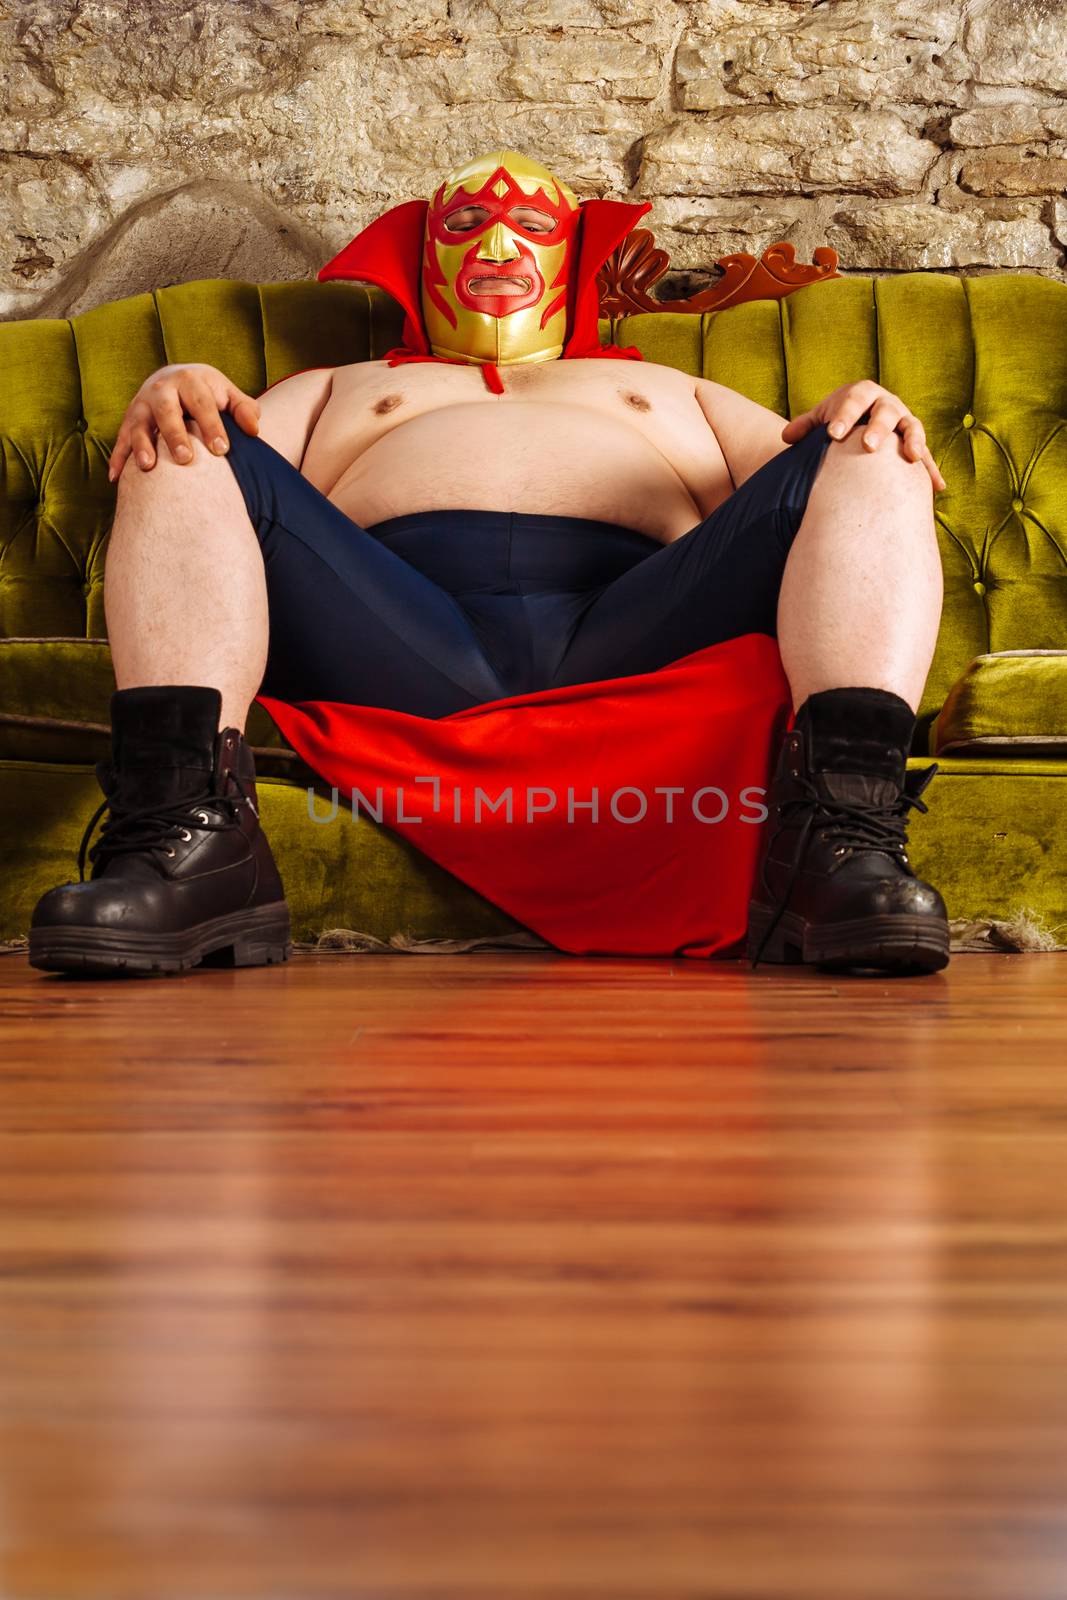 Photograph of a Mexican wrestler or Luchador sitting on a green couch waiting for his match to begin.